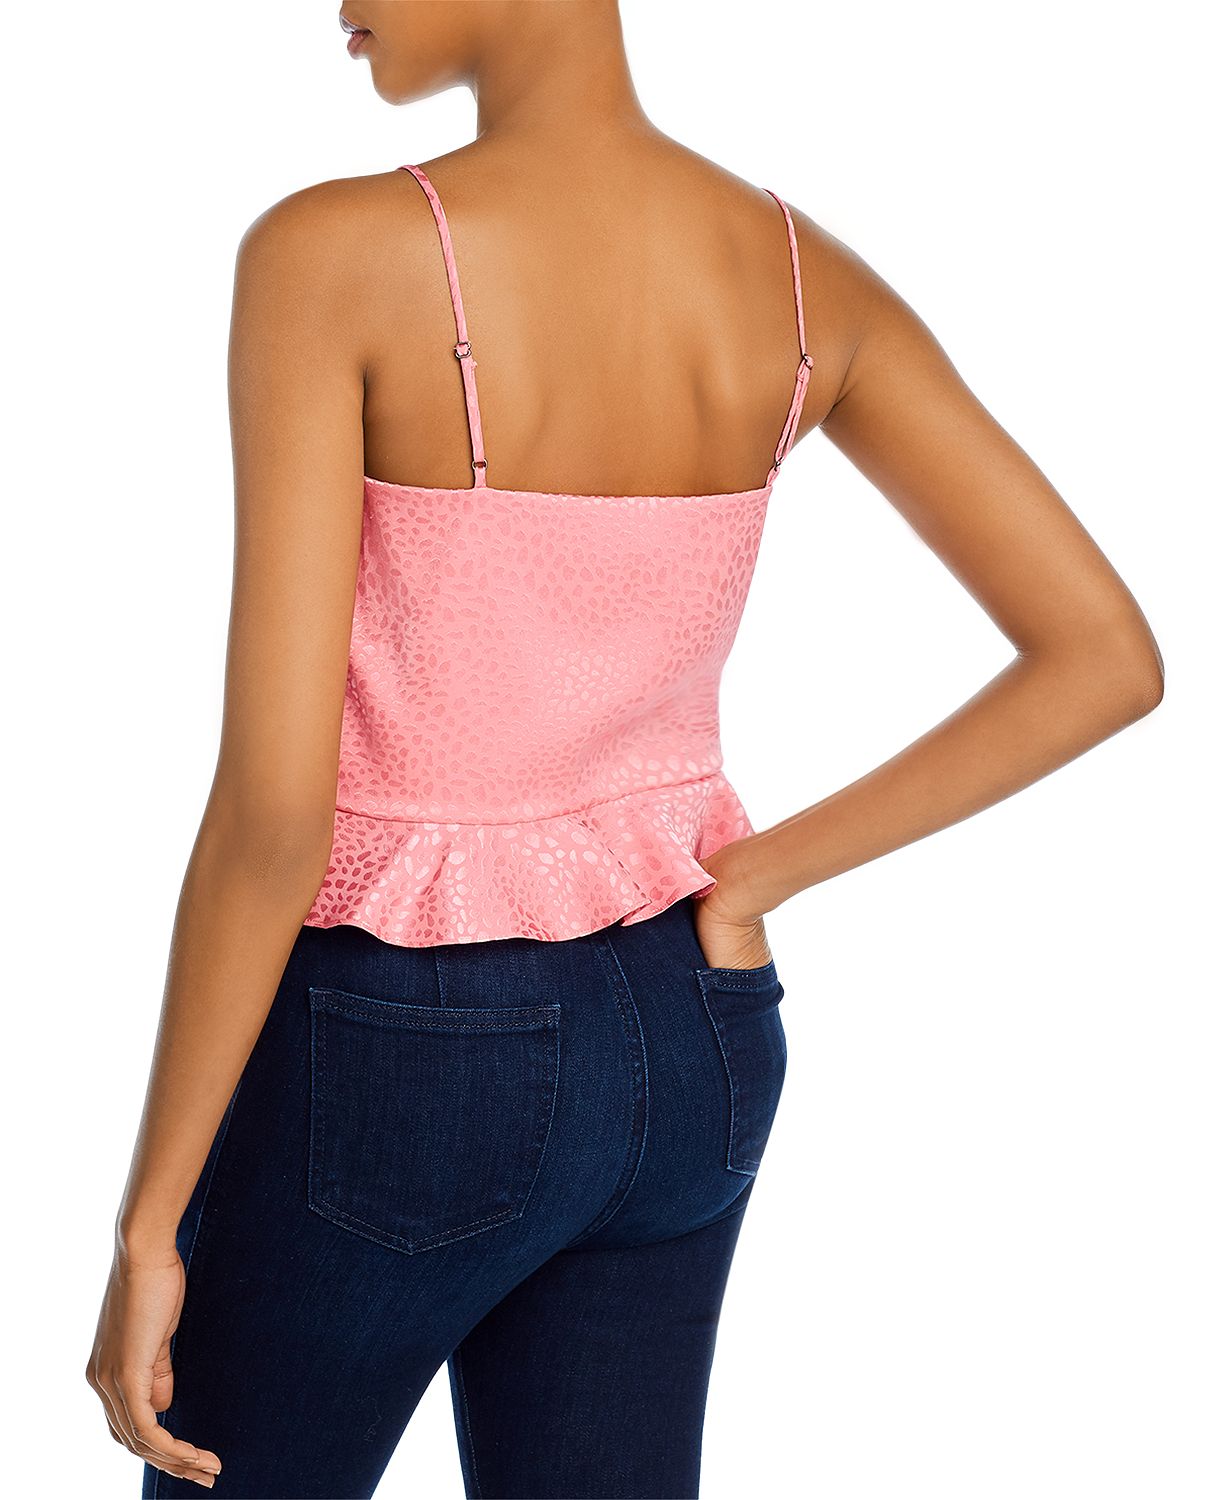 woocommerce-673321-2209615.cloudwaysapps.com-rebecca-minkoff-womens-pink-carson-cropped-wrap-top